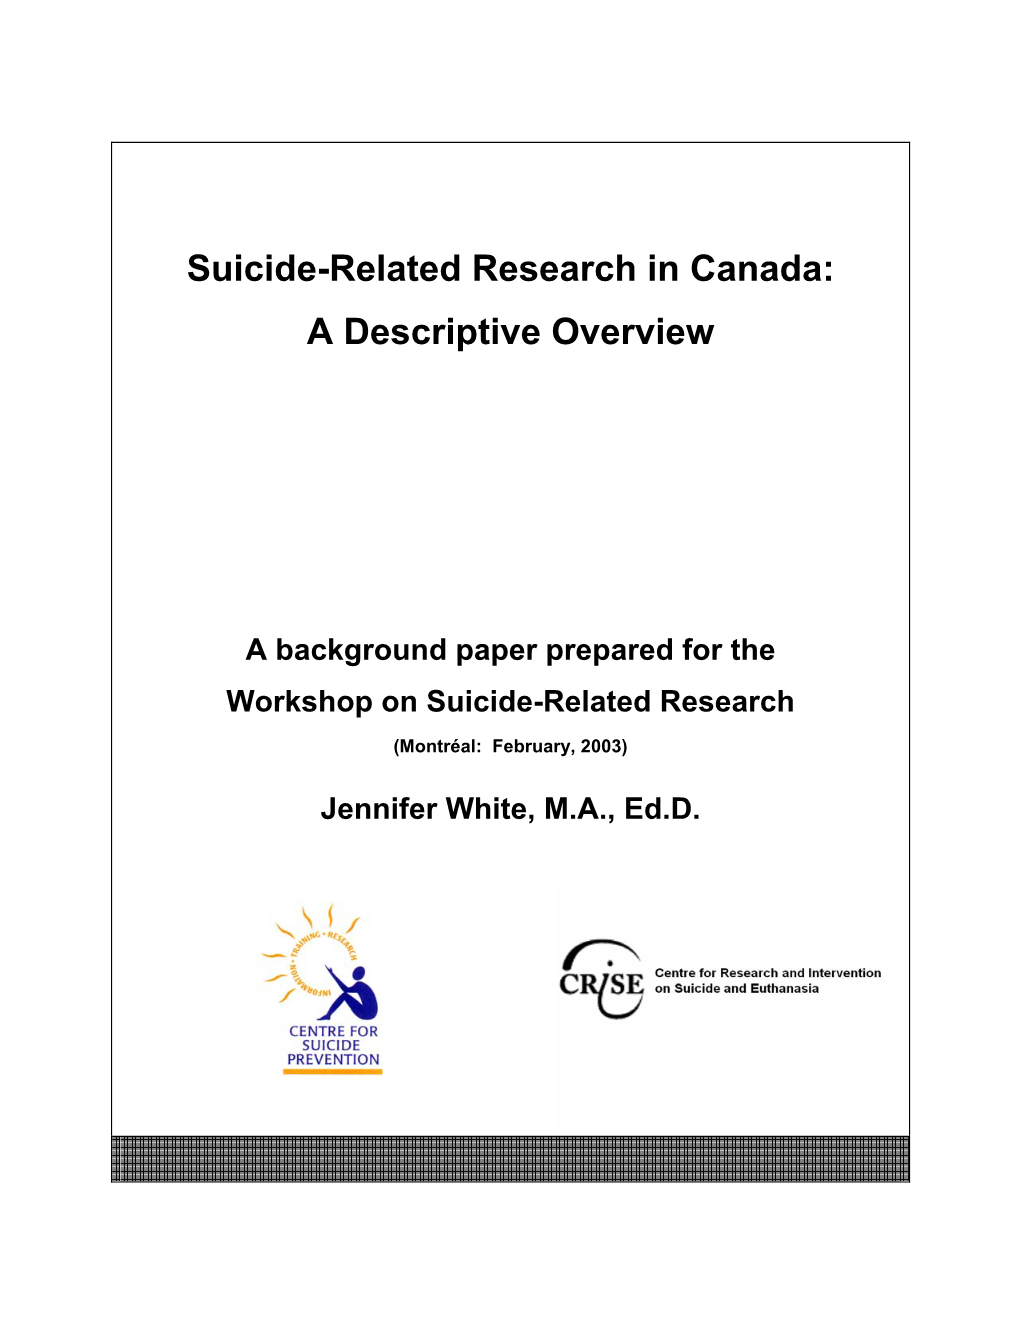 Suicide-Related Research in Canada: a Descriptive Overview